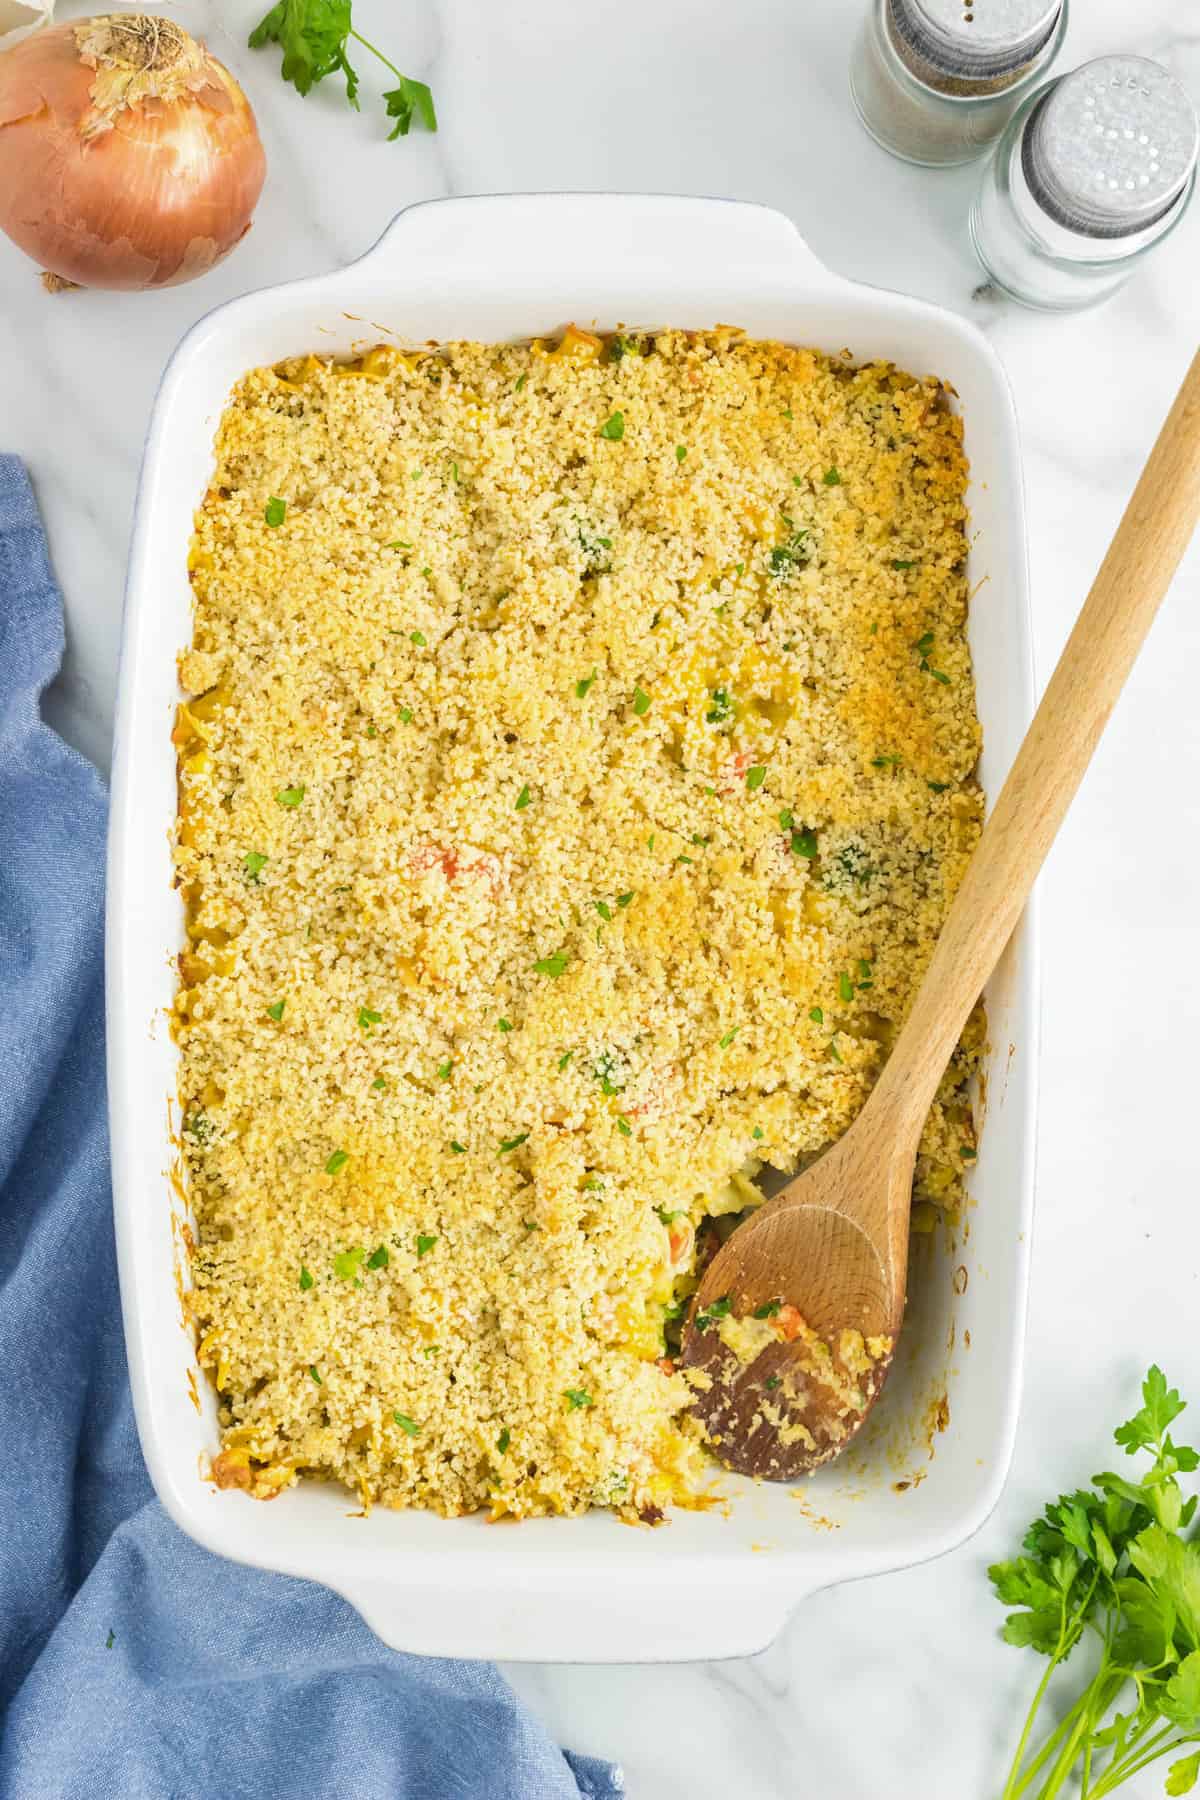 Using wooden spoon to scoop Chicken Noodle Casserole from 9x13 baking dish